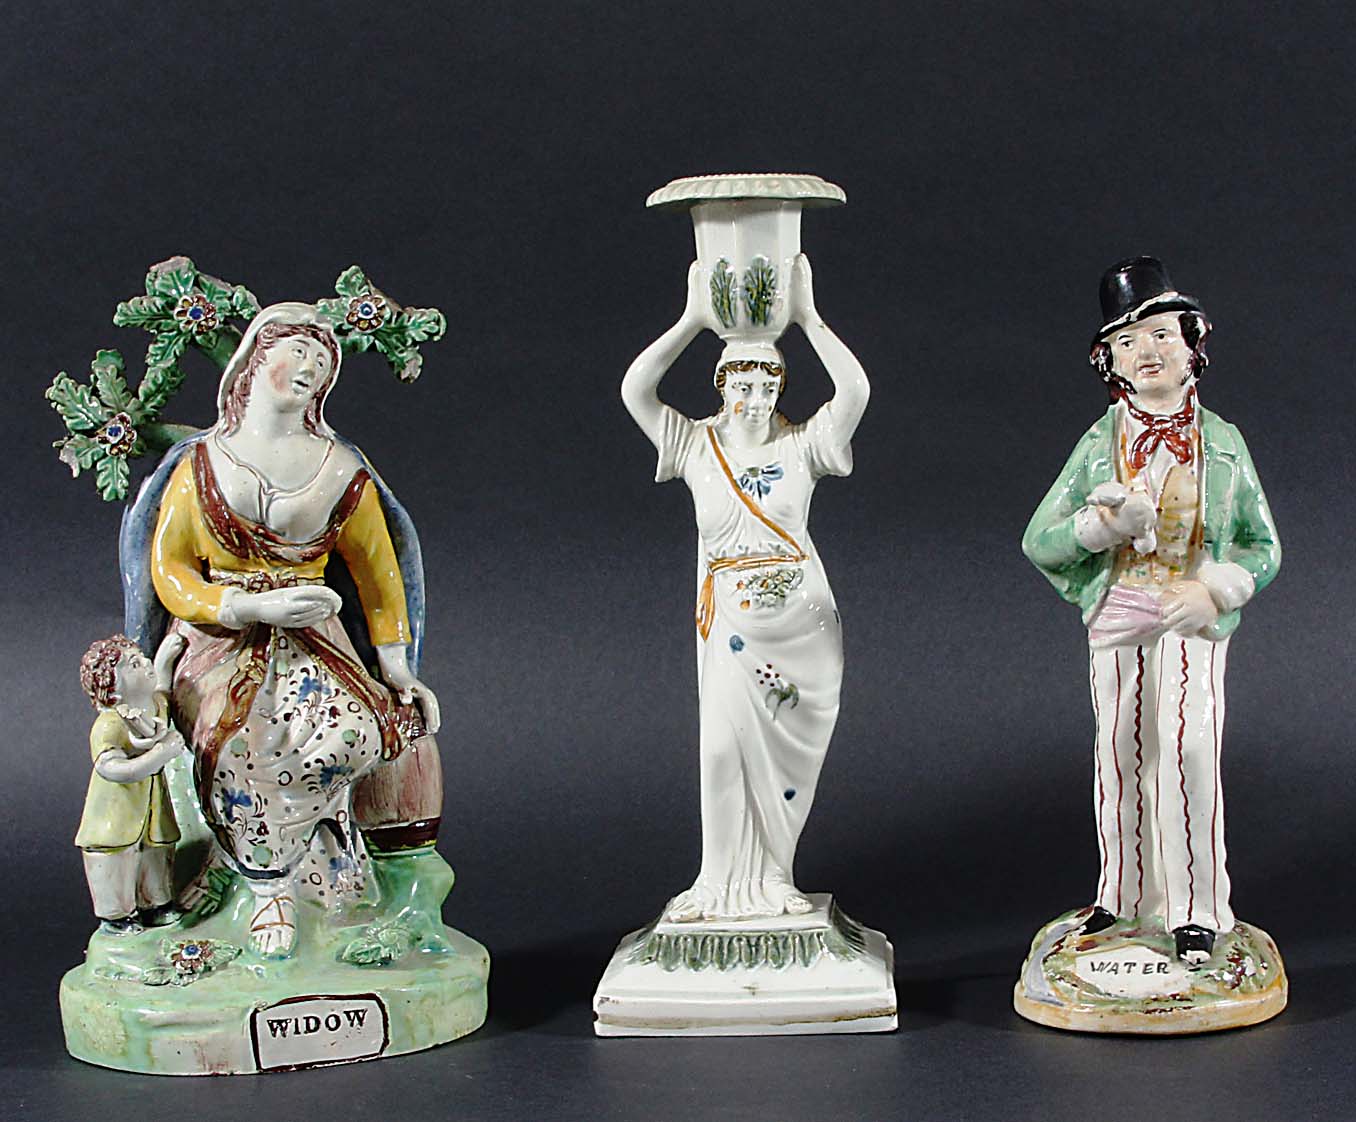 PRATTWARE CANDLESTICK, circa 1800, a classical maiden holding up the sconce, height 25cm; together